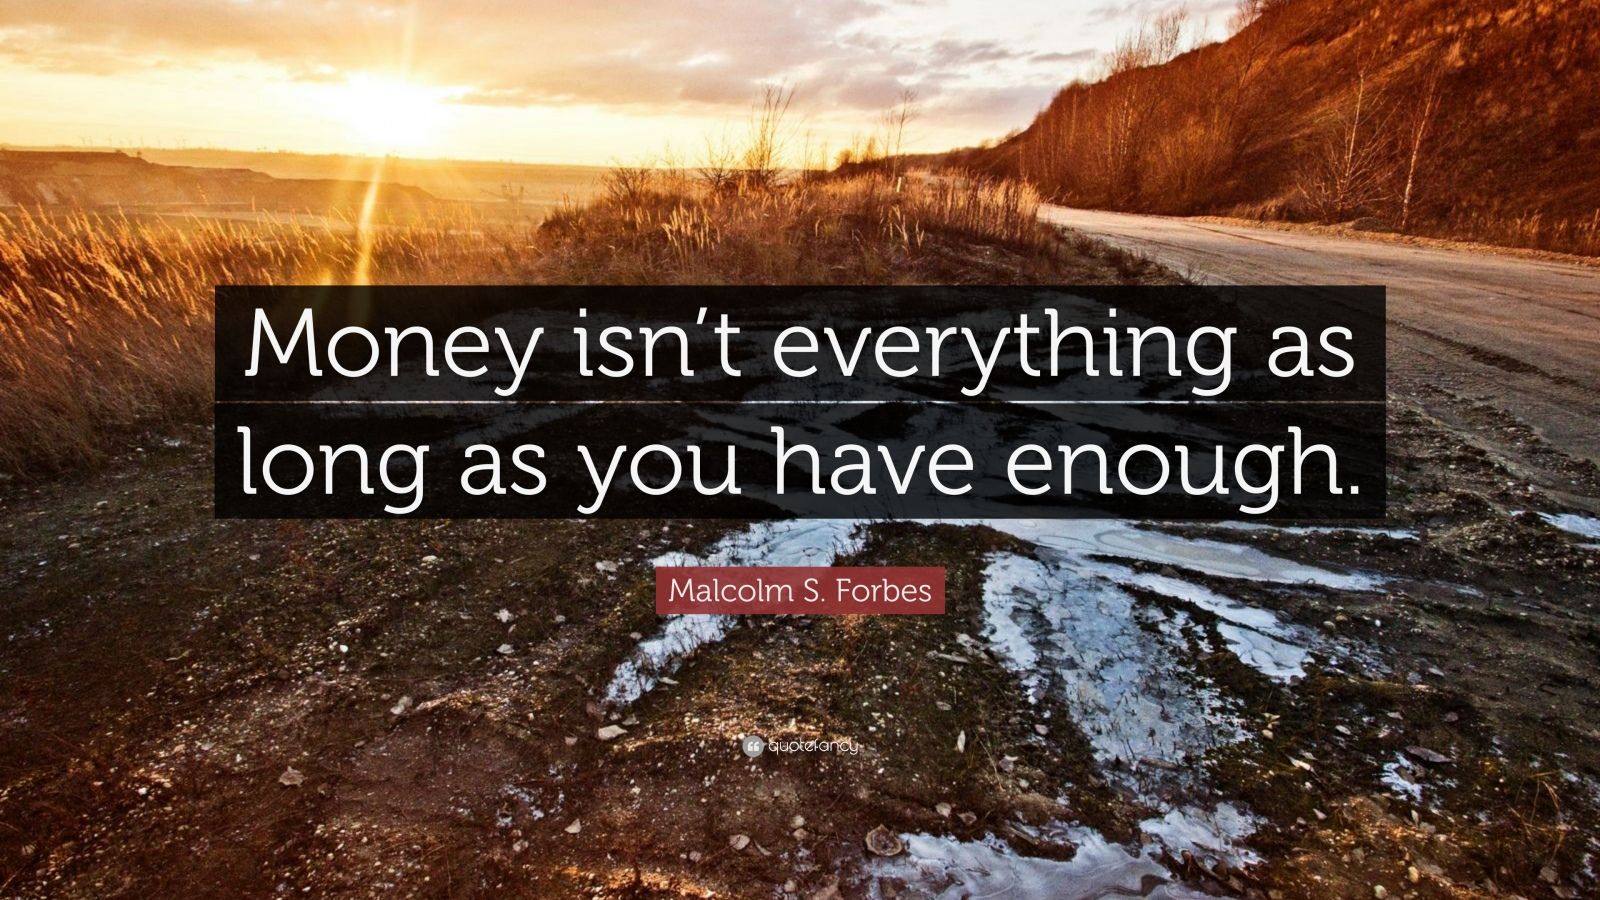 Malcolm S. Forbes Quote: “Money isn’t everything as long as you have ...